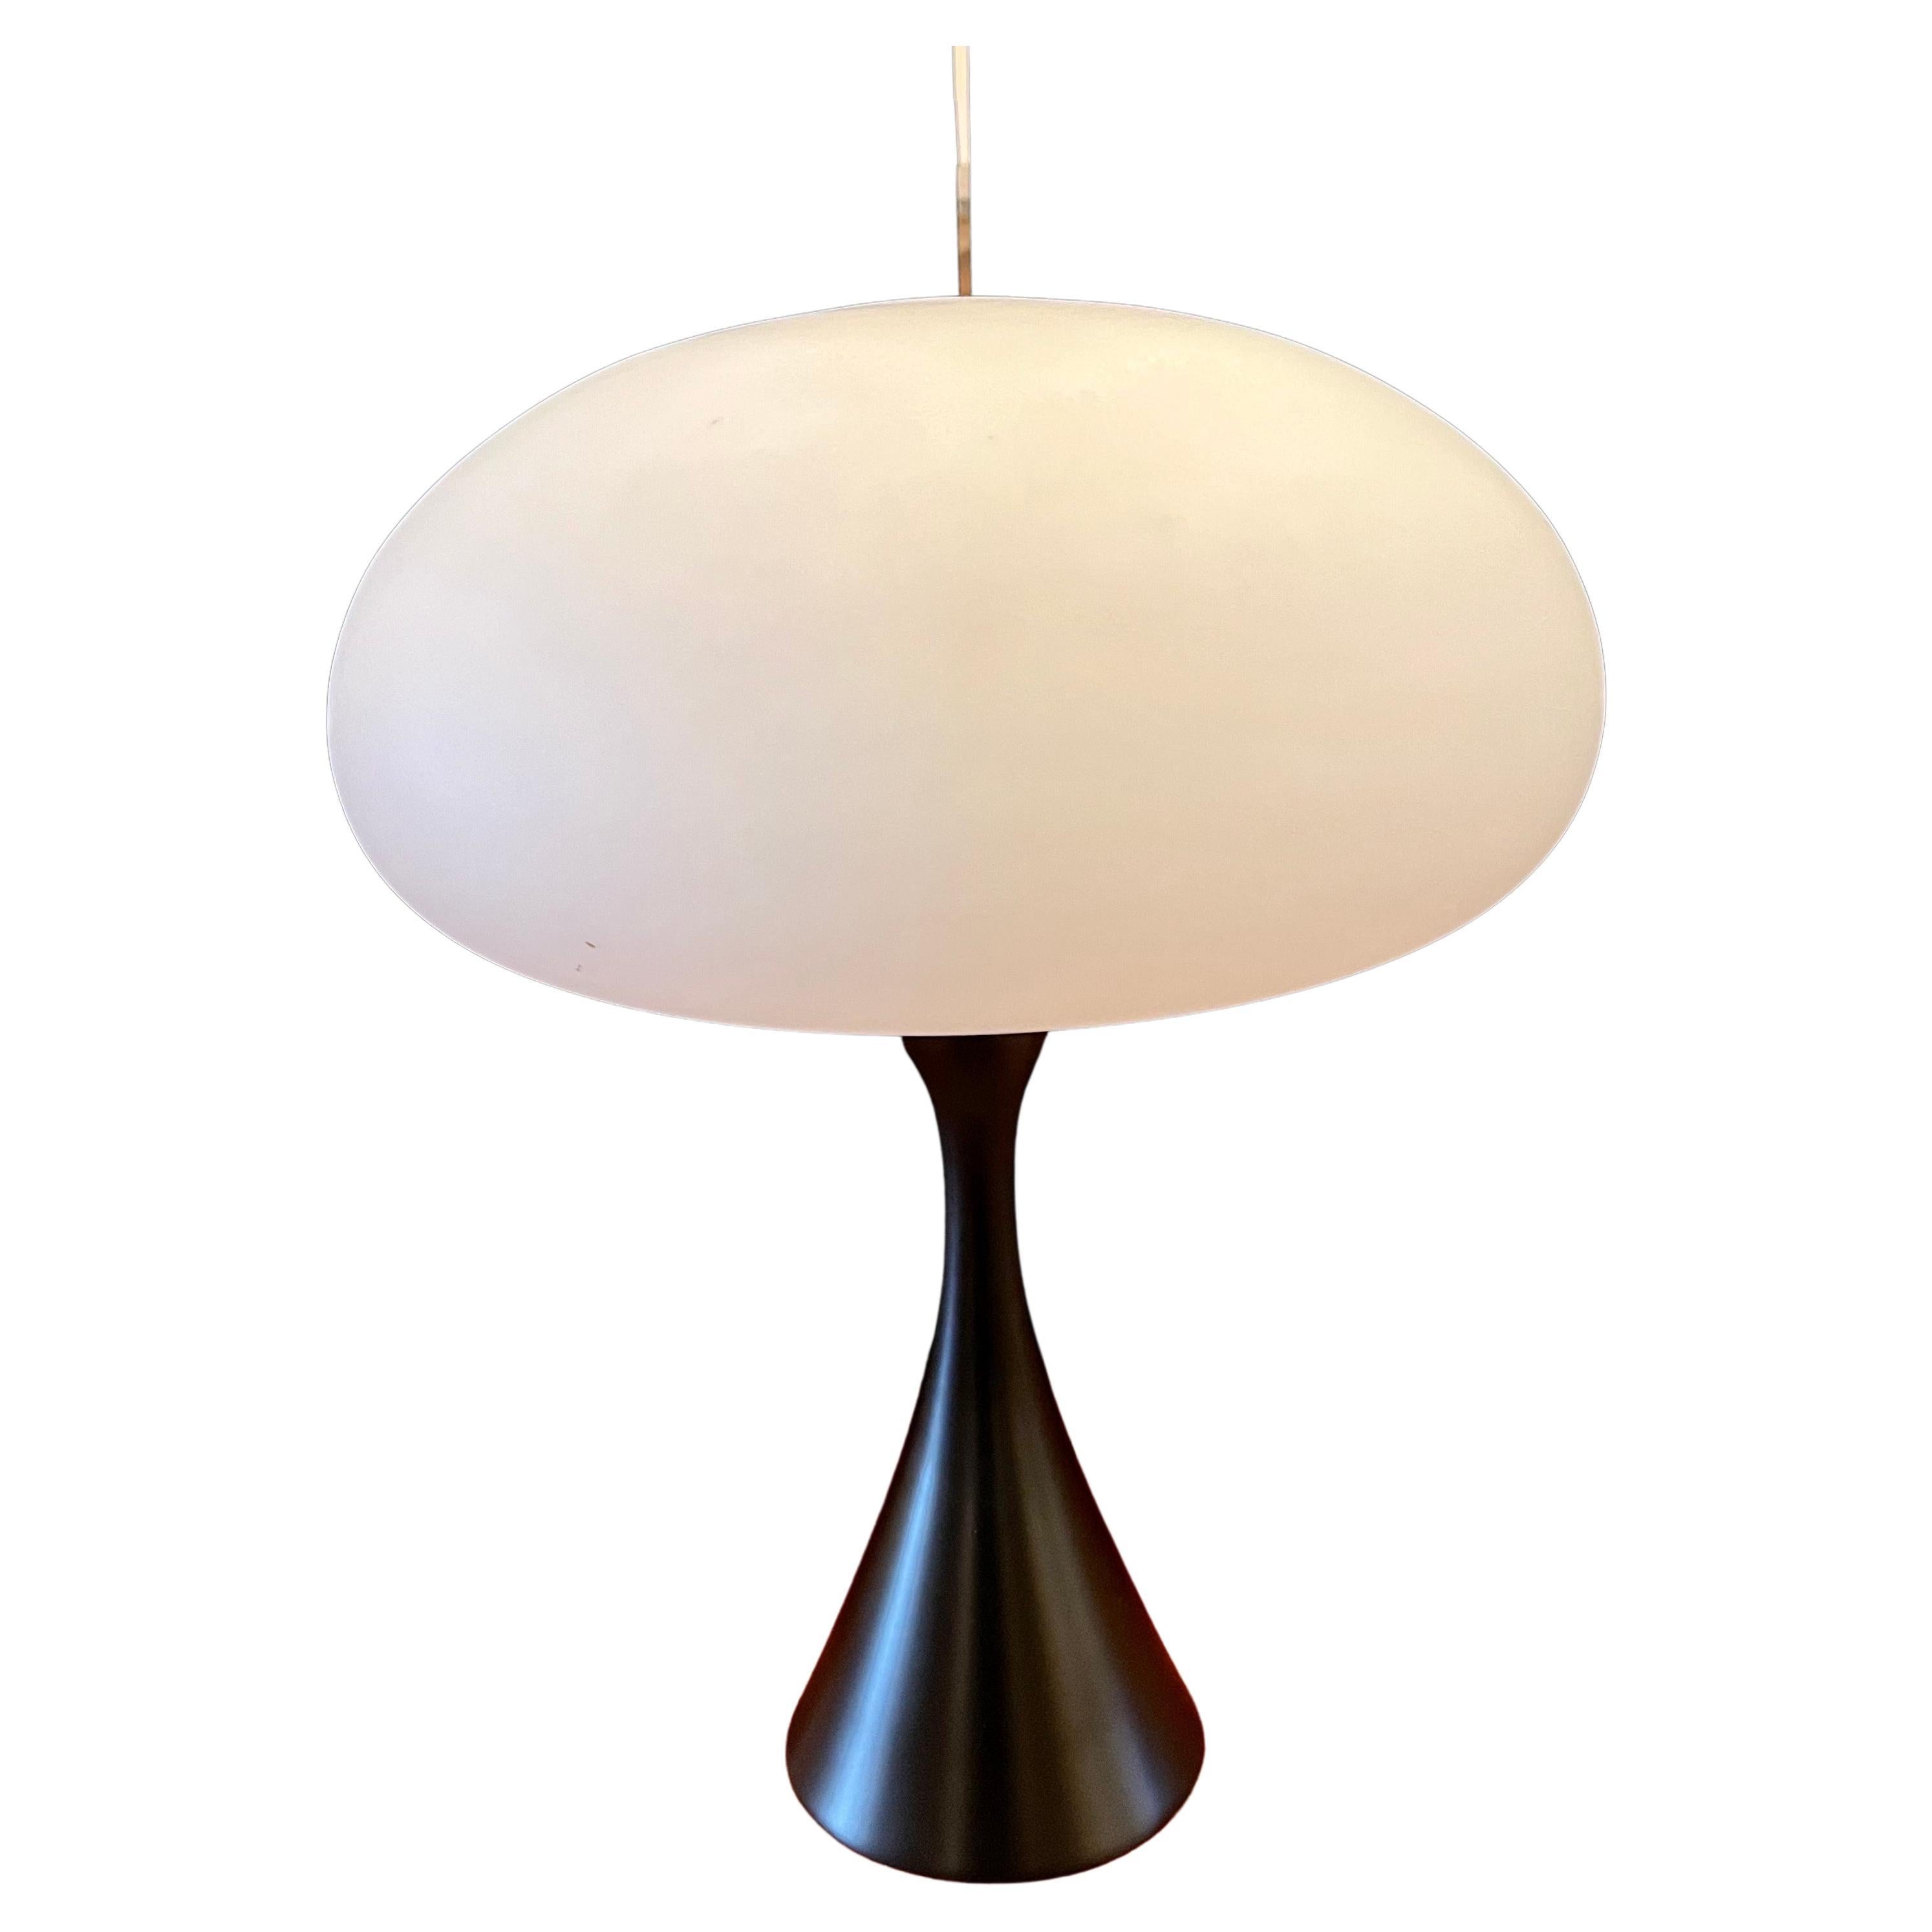 beautiful striking mushroom table lamp was designed by Laurel Lighting Company, the base has a black satin enamel finish, and the lampshade it’s made in Italy, mouth-blown glass.